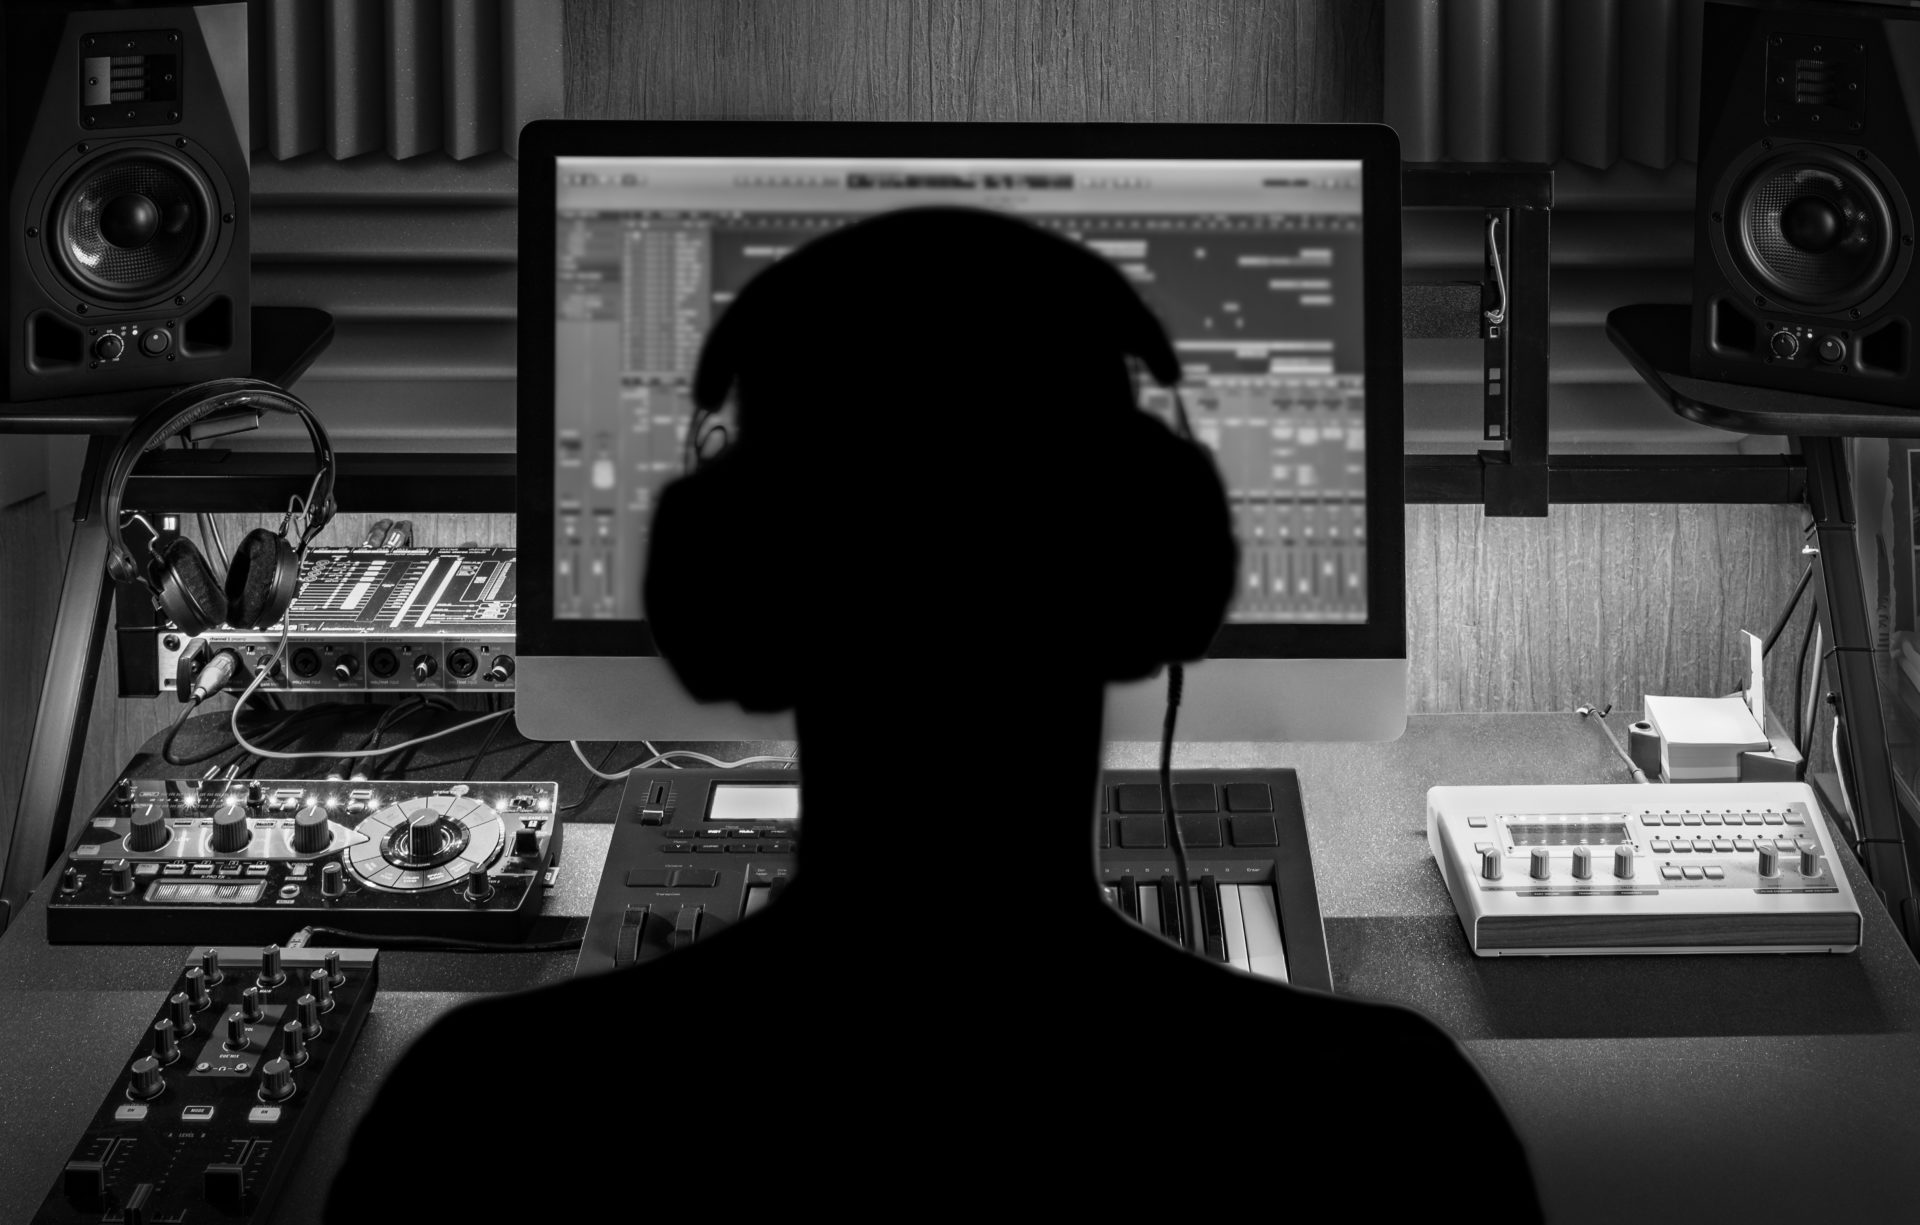 Black and white picture of a man in front of a computer with headphones on creating music